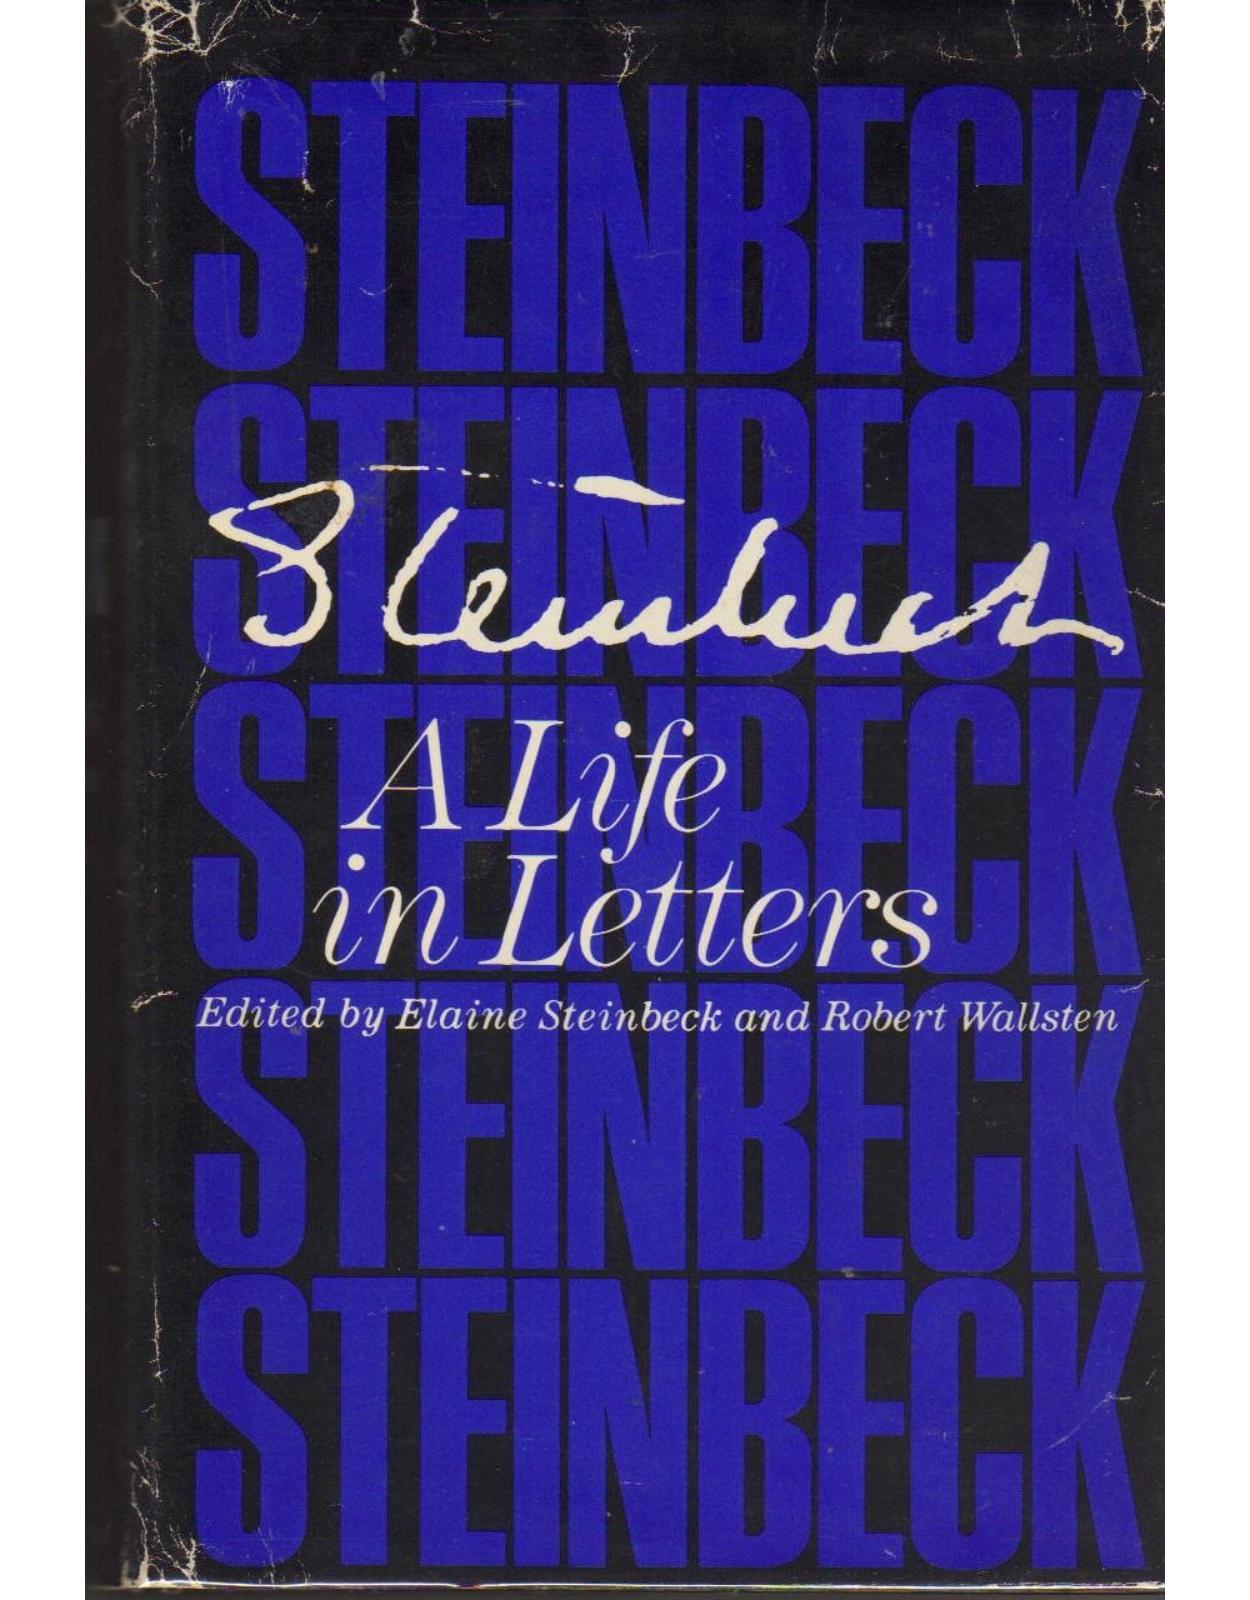 Steinbeck: A Life in Letters